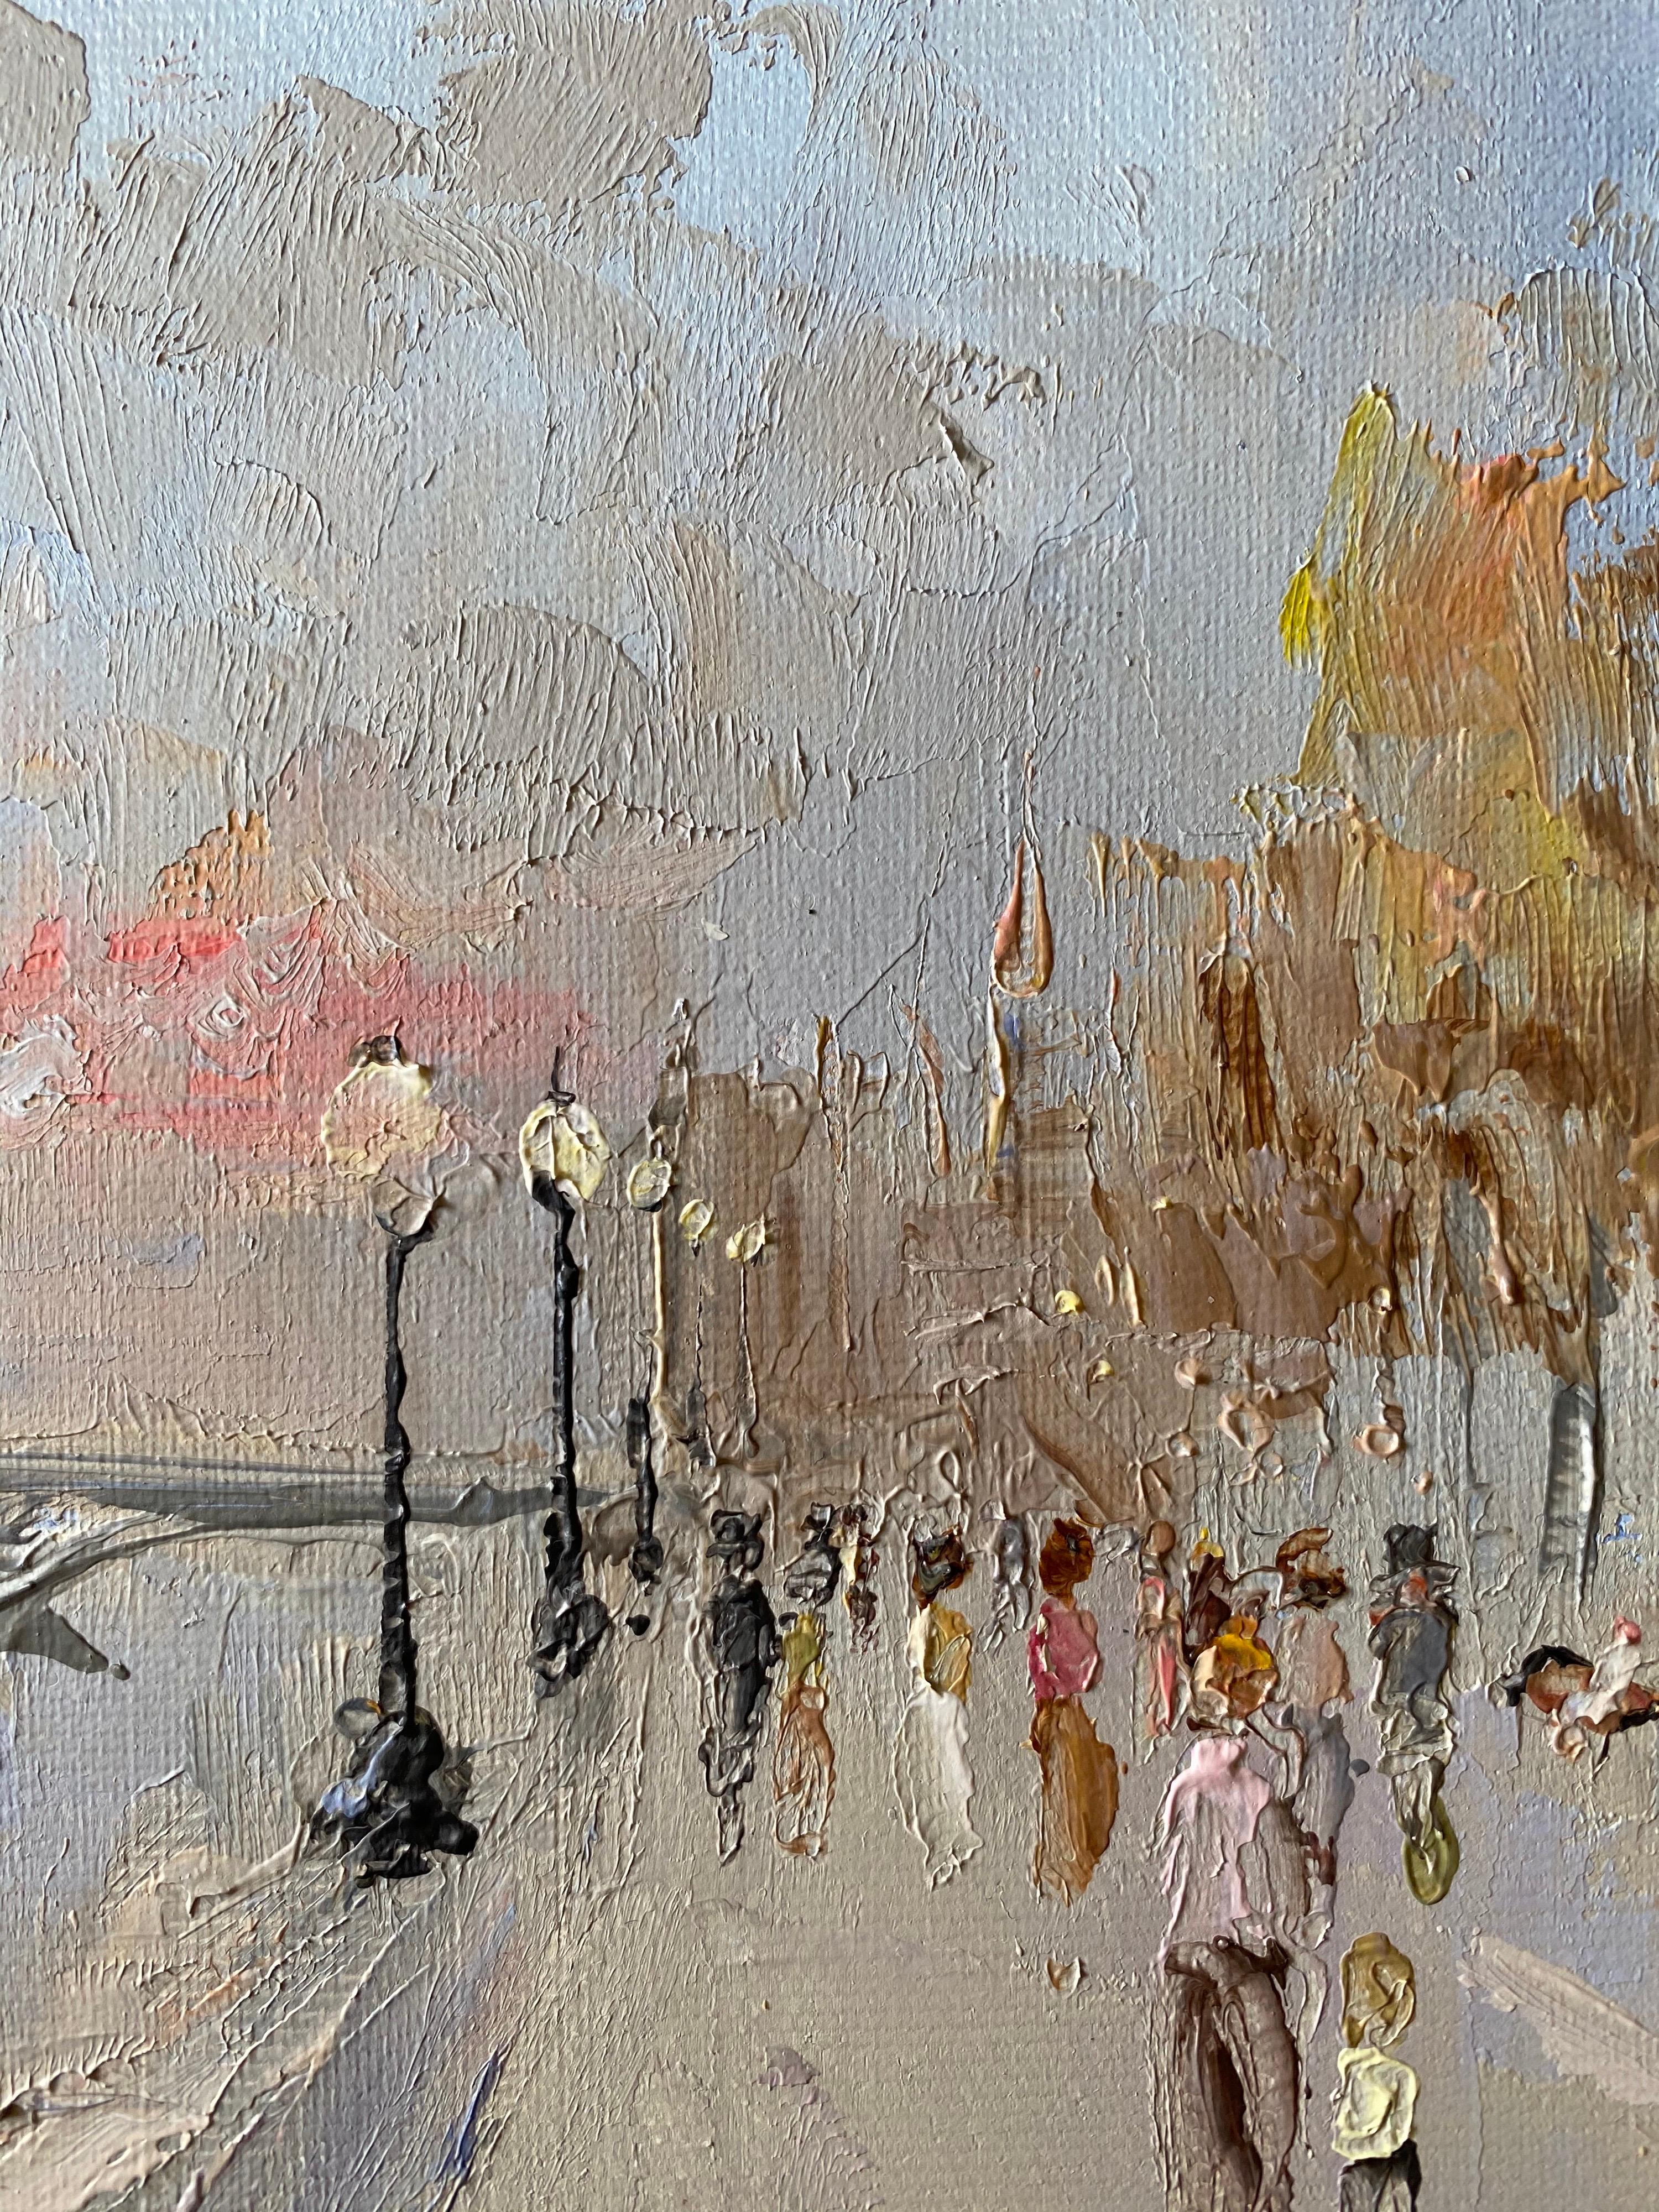 Figures Walking by the River Seine Paris, early evening pink sunset sky - Painting by English Impressionist